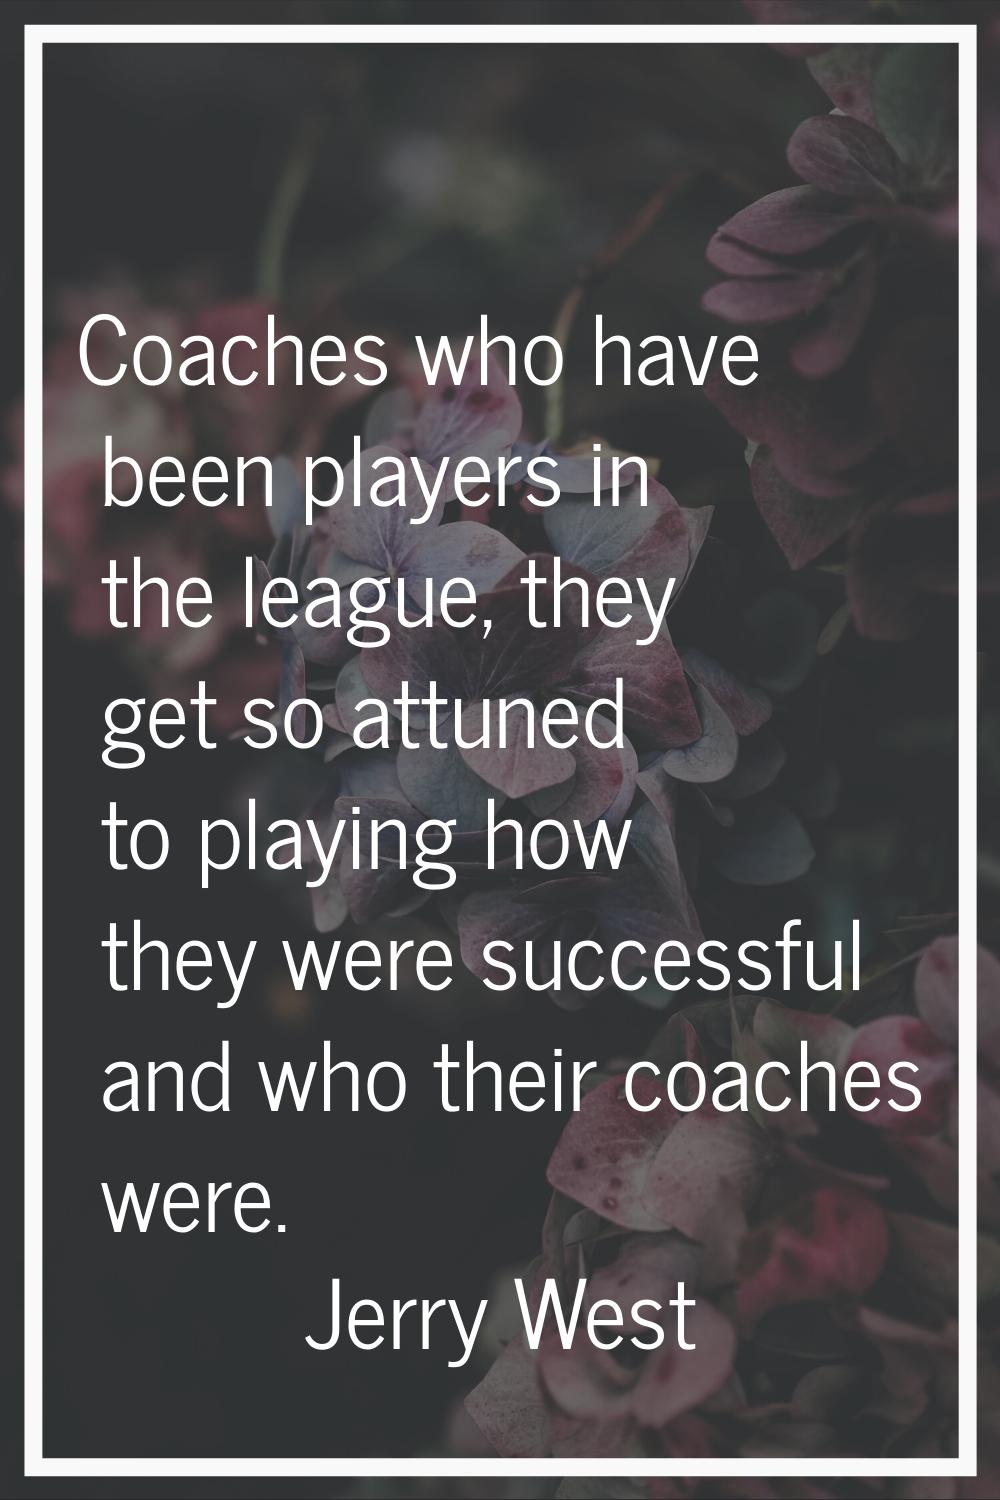 Coaches who have been players in the league, they get so attuned to playing how they were successfu